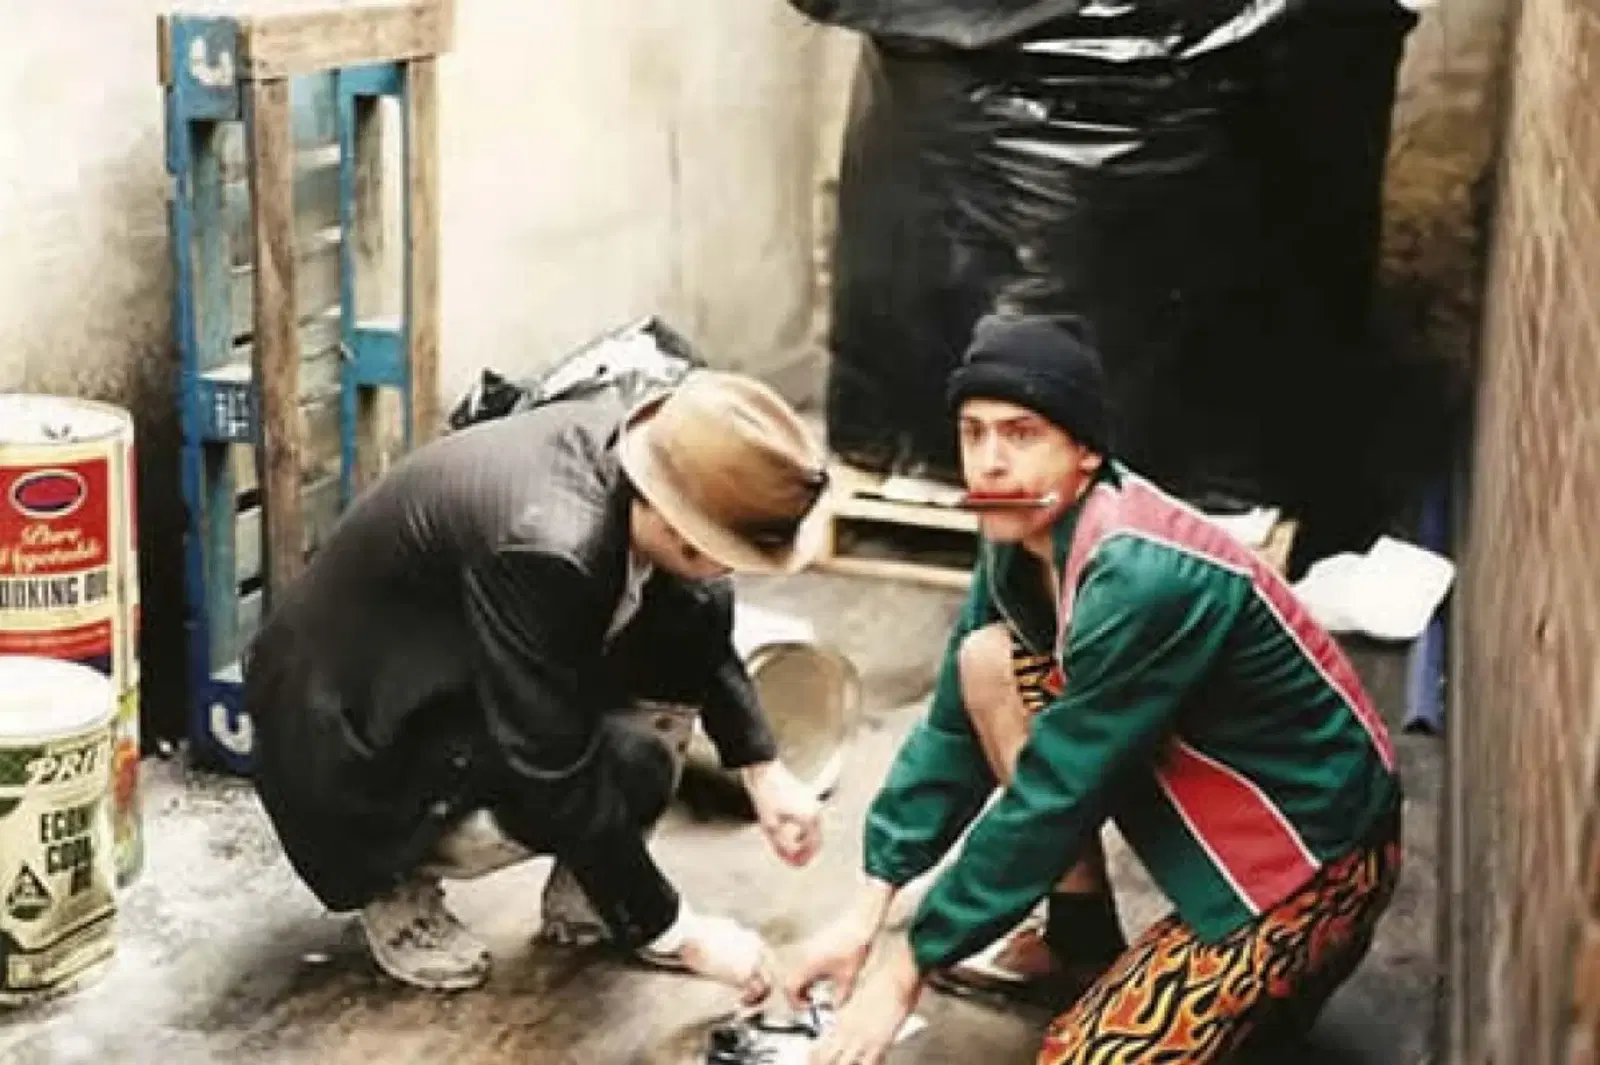 Two individuals squatting on a concrete floor engaged in an activity together, surrounded by various items and with a stark urban backdrop.